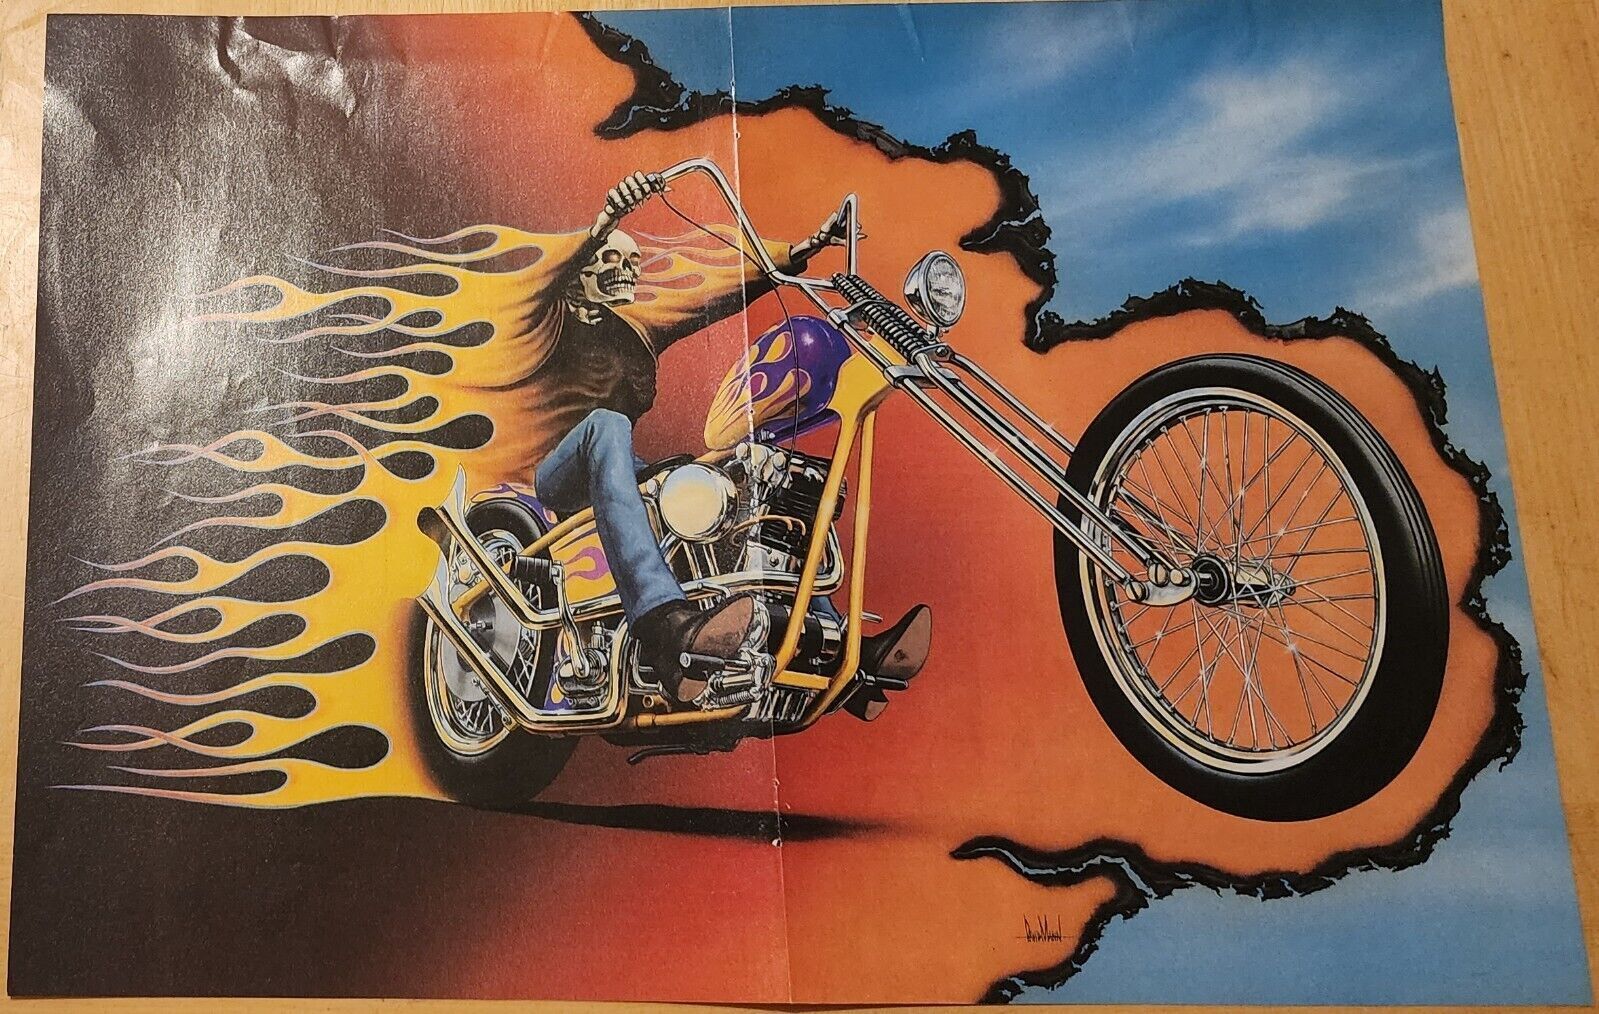 RARE David Mann Easyriders Magazine Centerfold 2-page Art Pullout Skull Flames